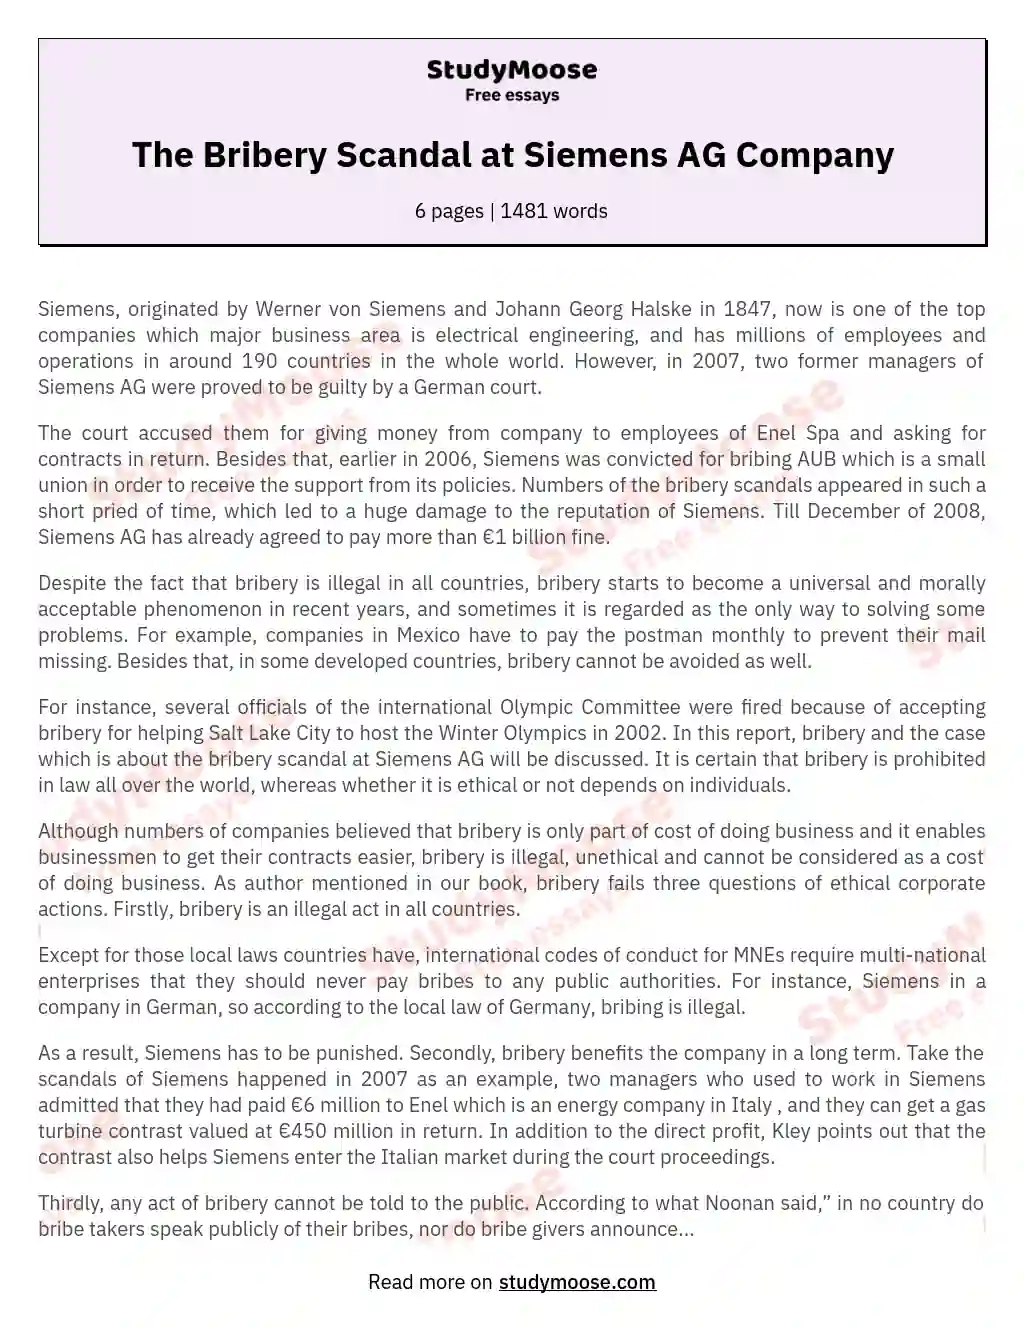 Ethical Implications of Bribery Scandals at Siemens essay